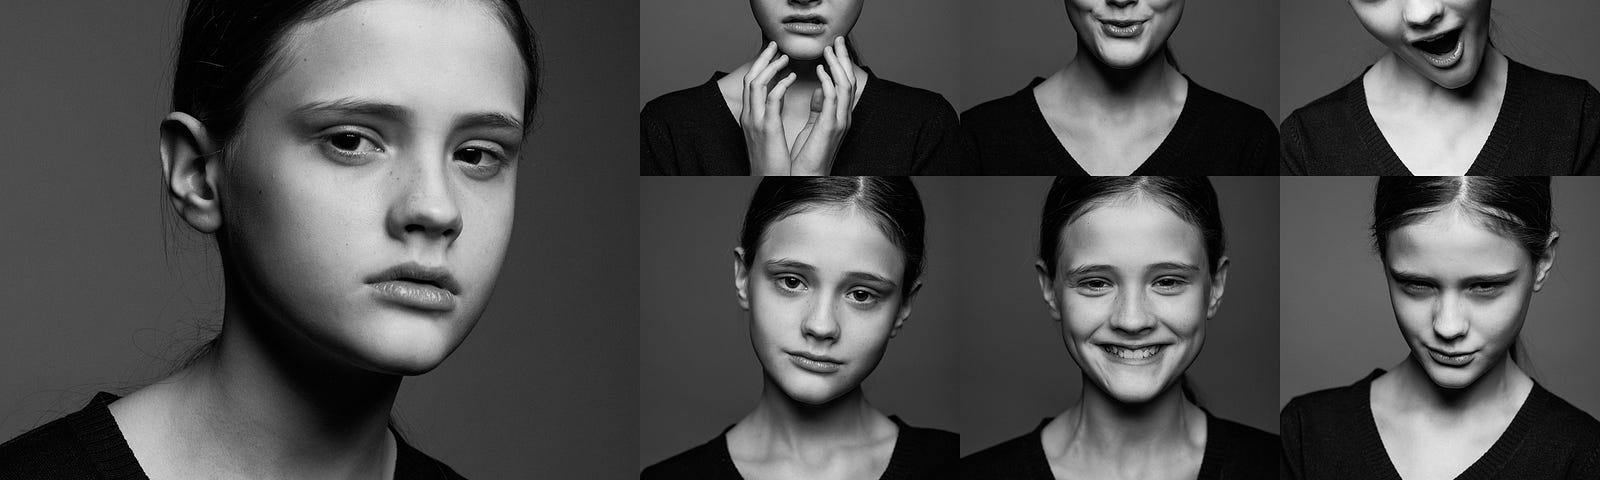 Collage of emotional portraits of young girls